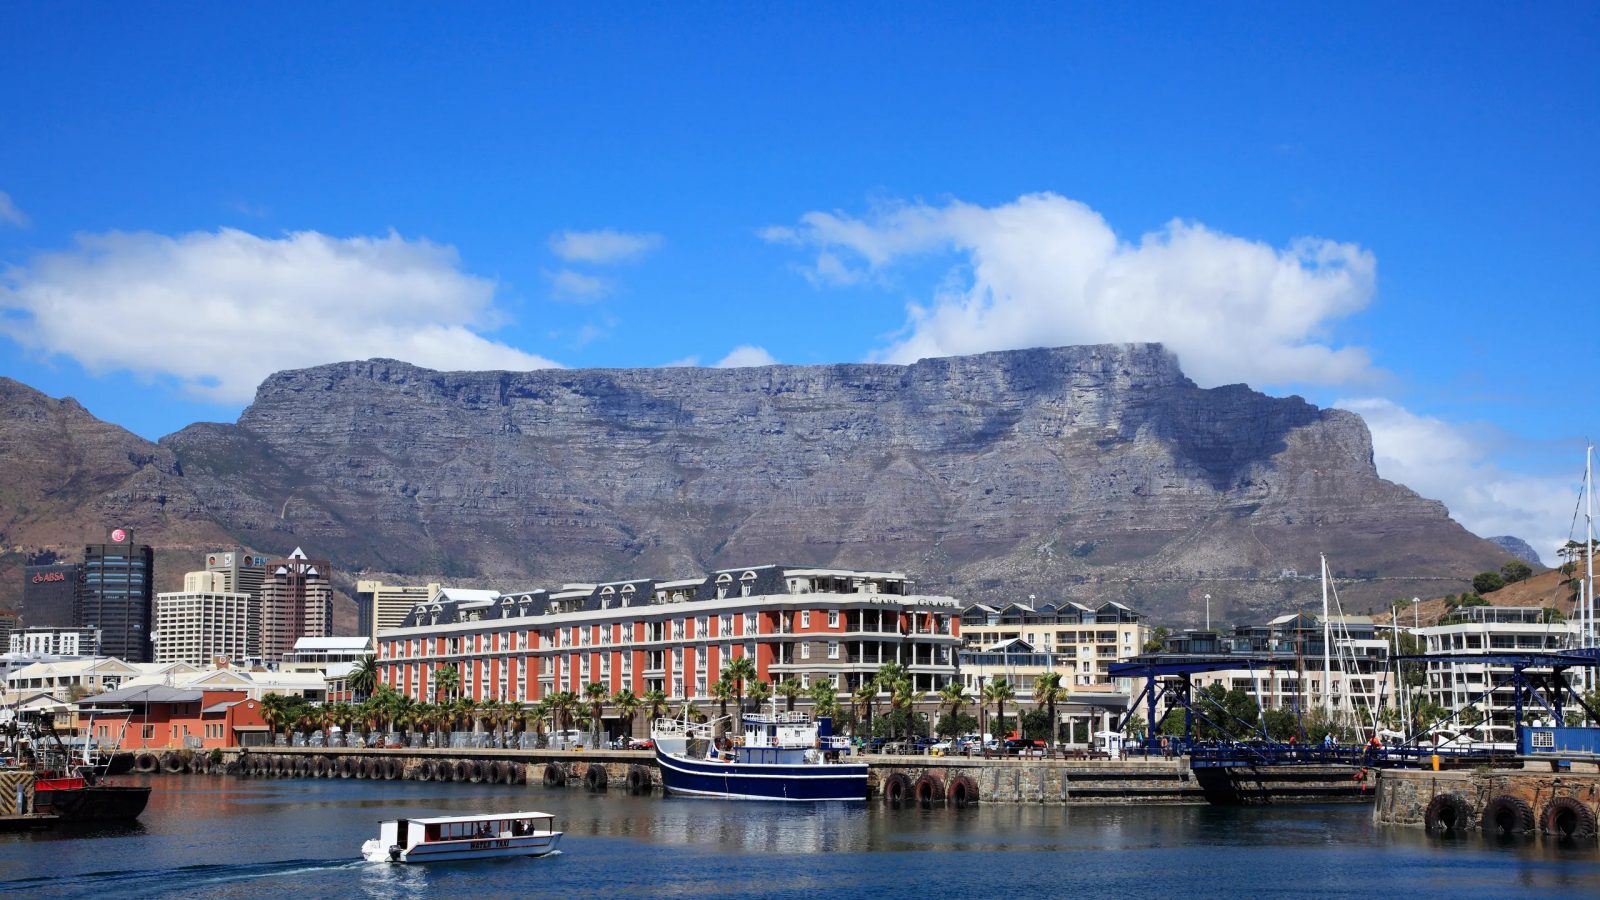 Here Are 24 Glorious Natural Attractions – Can You Match Them to Their Country? Table Mountain, Cape Town, South Africa